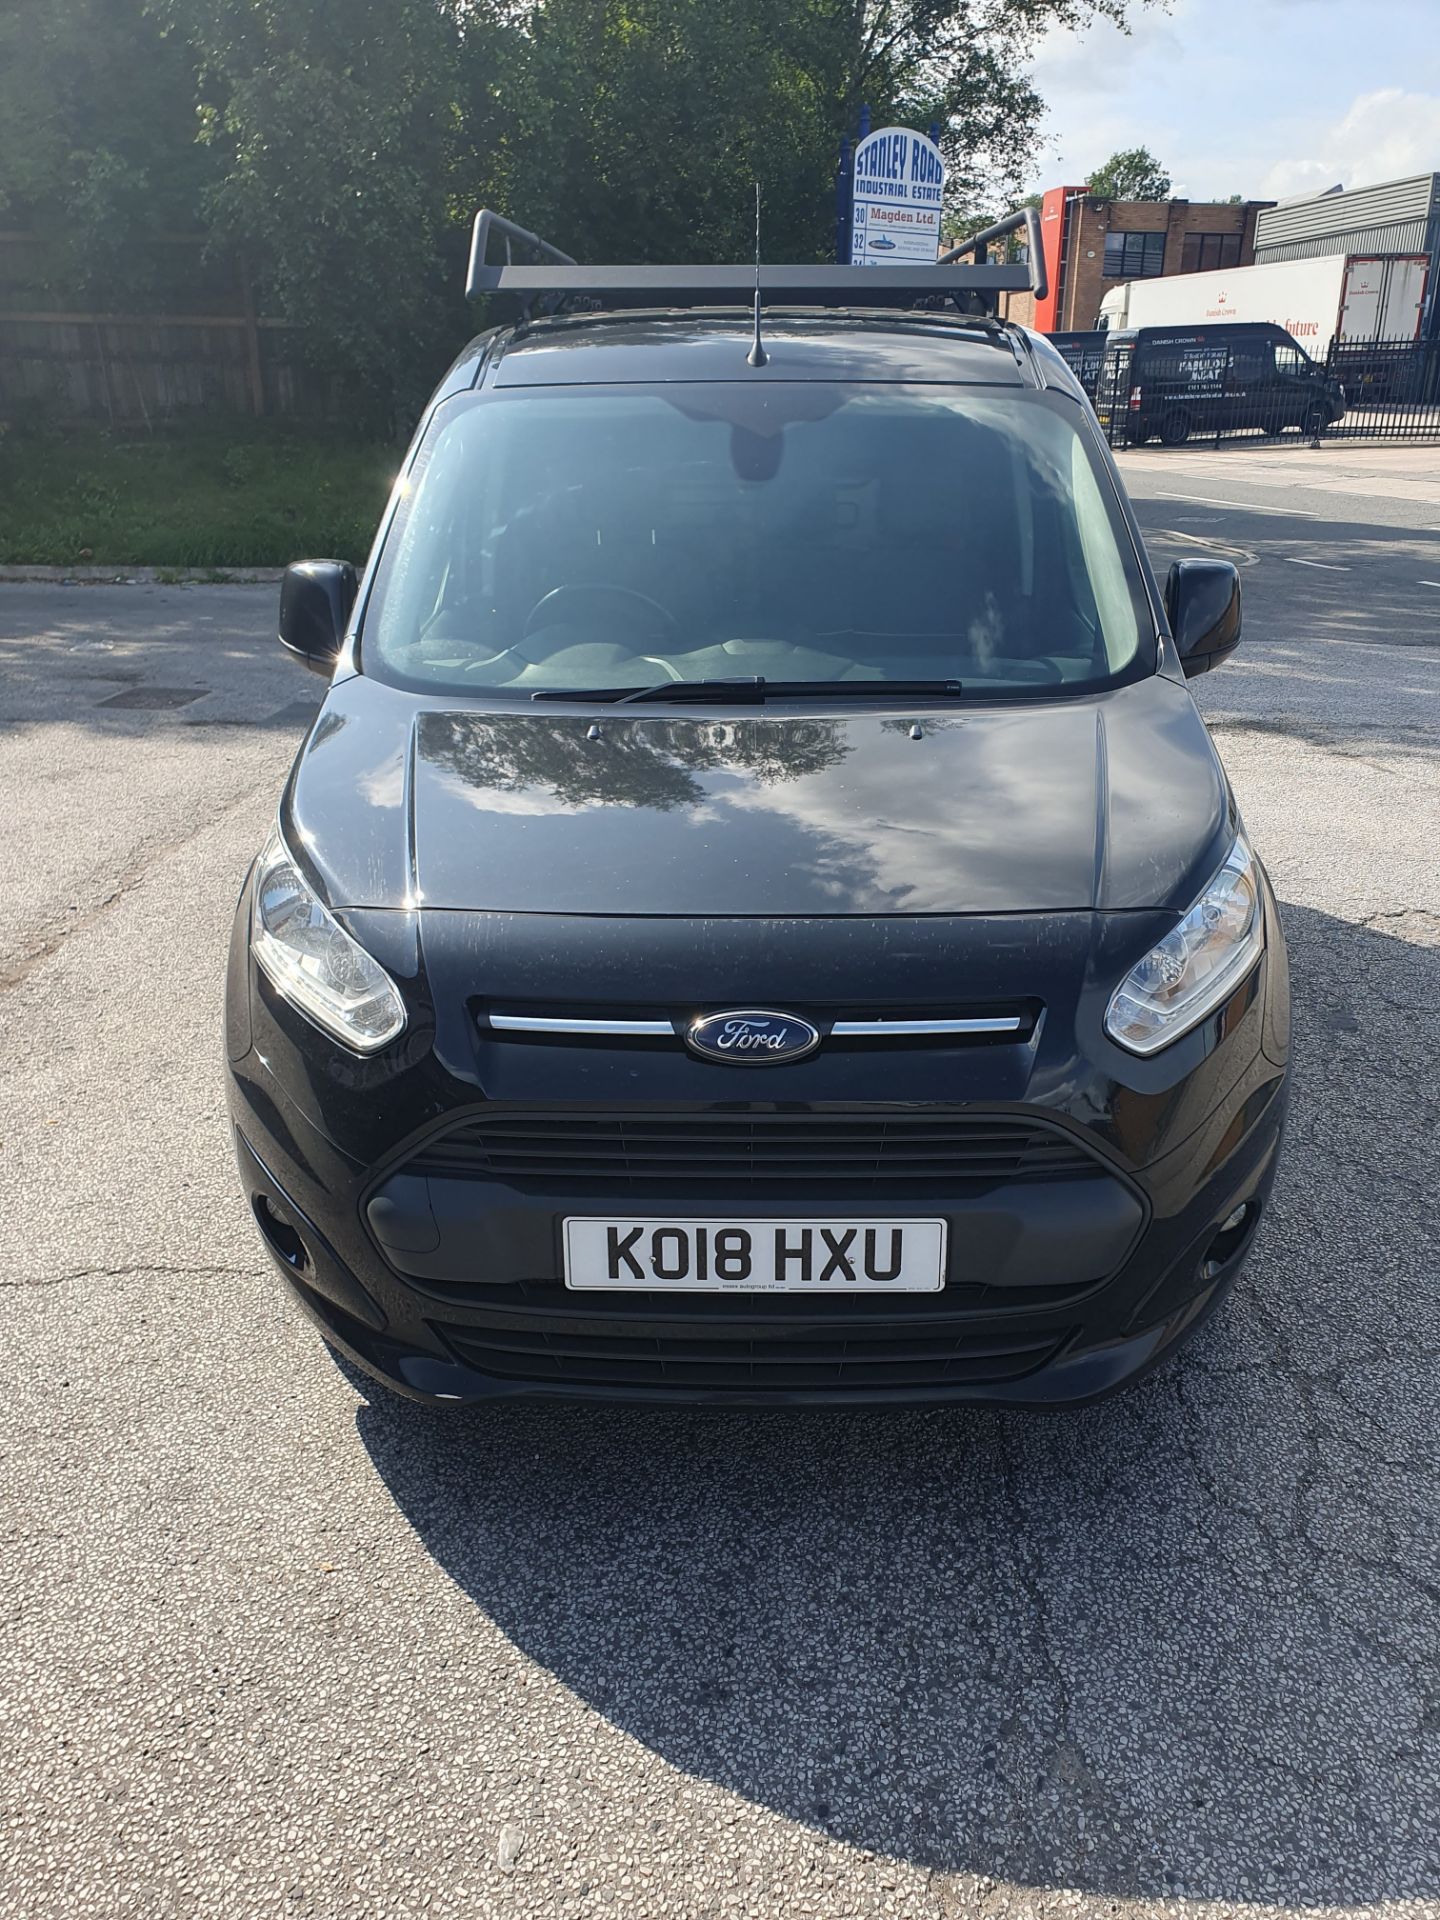 Ford Transit Connect 200 Limited | KO18 HXU | Mileage: 80,876 - Image 2 of 17